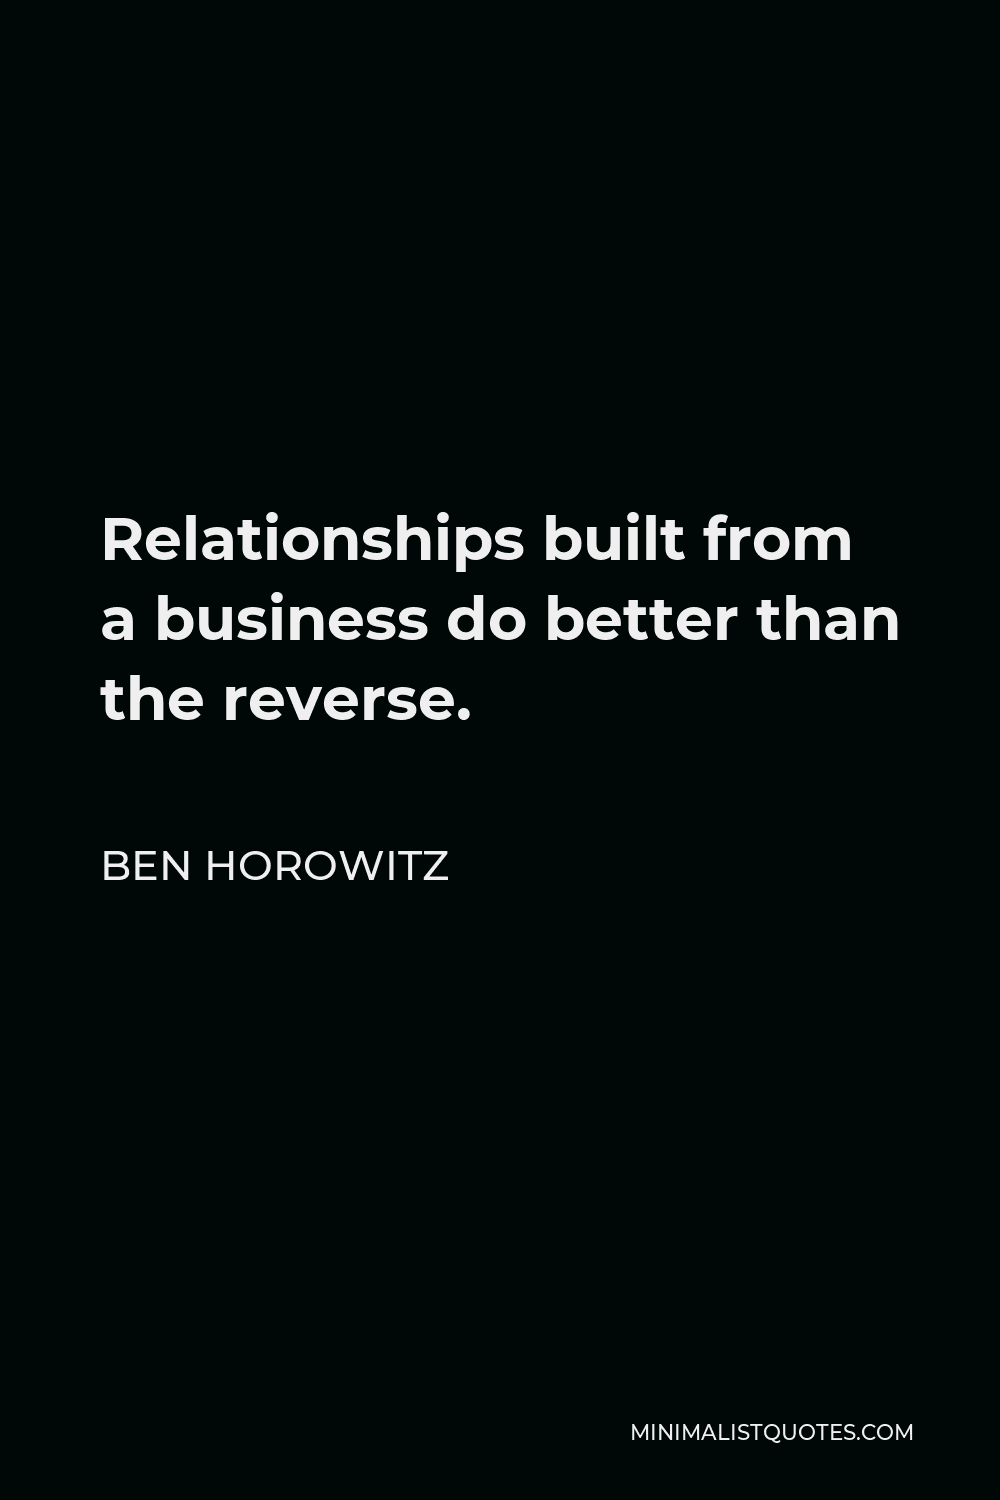 Ben Horowitz Quote - Relationships built from a business do better than the reverse.